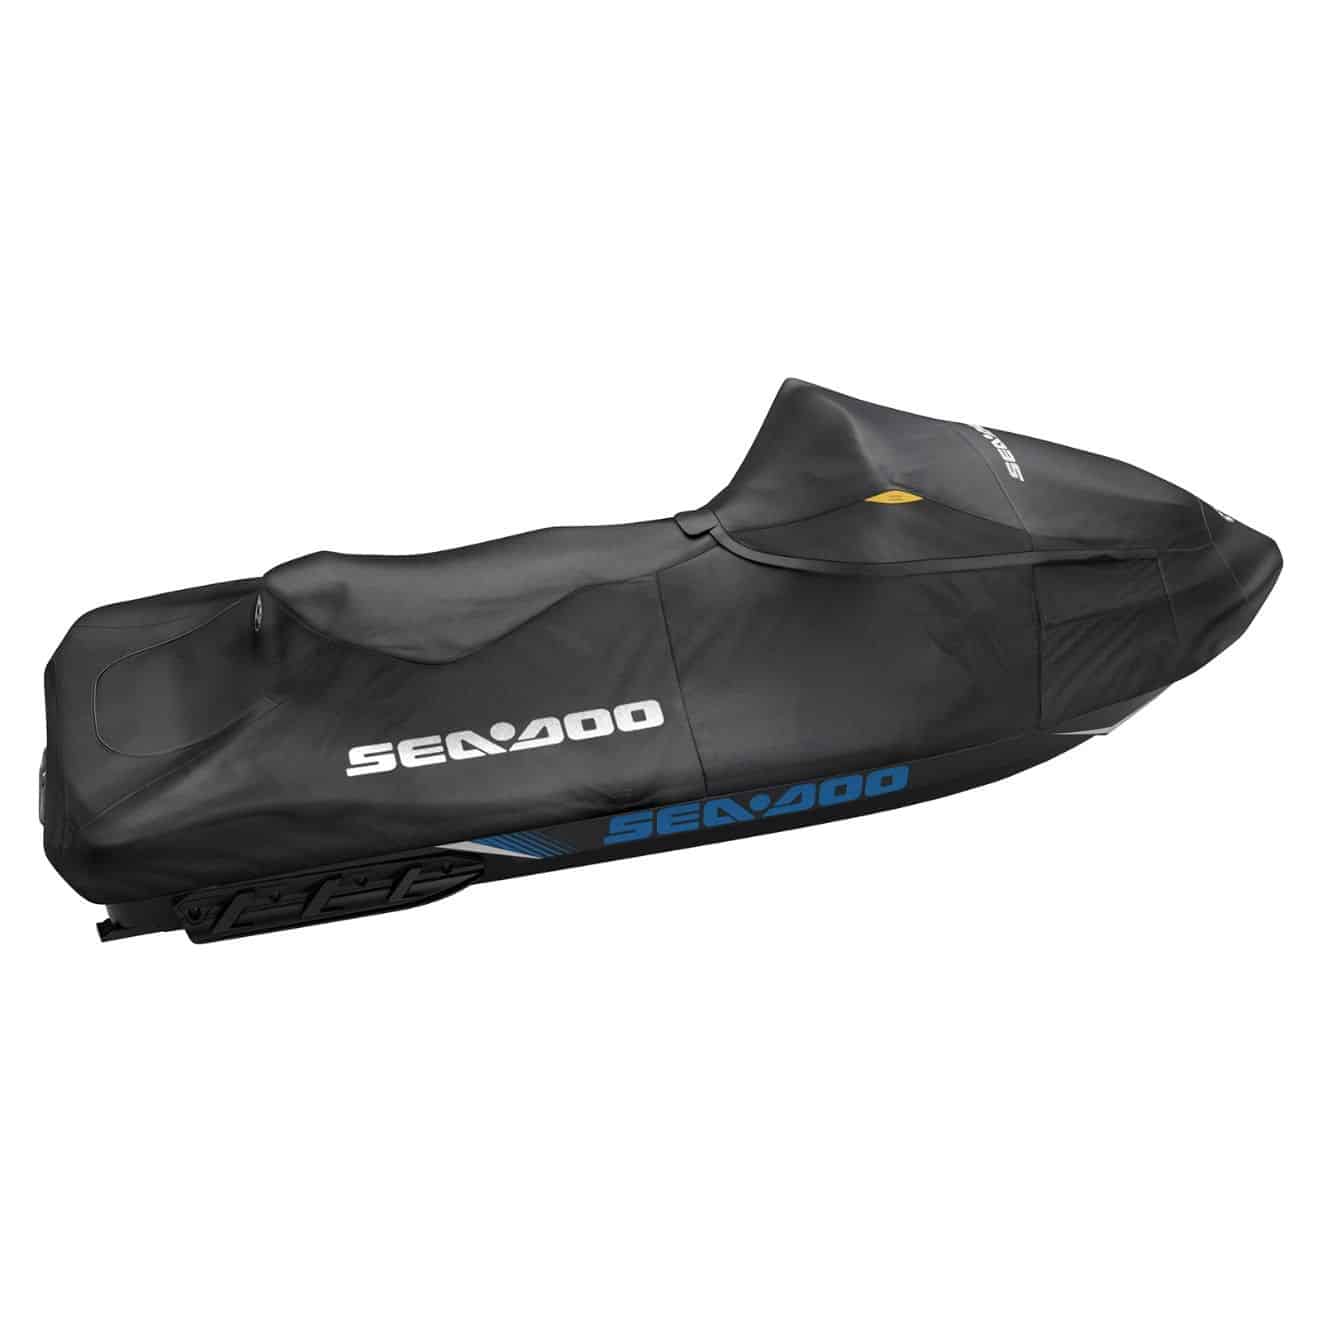 Must-have accessories for your jet skis  Friday's Sea-Doo Jet Skis &  Can-Am ATVs – Friday's Jet Skis